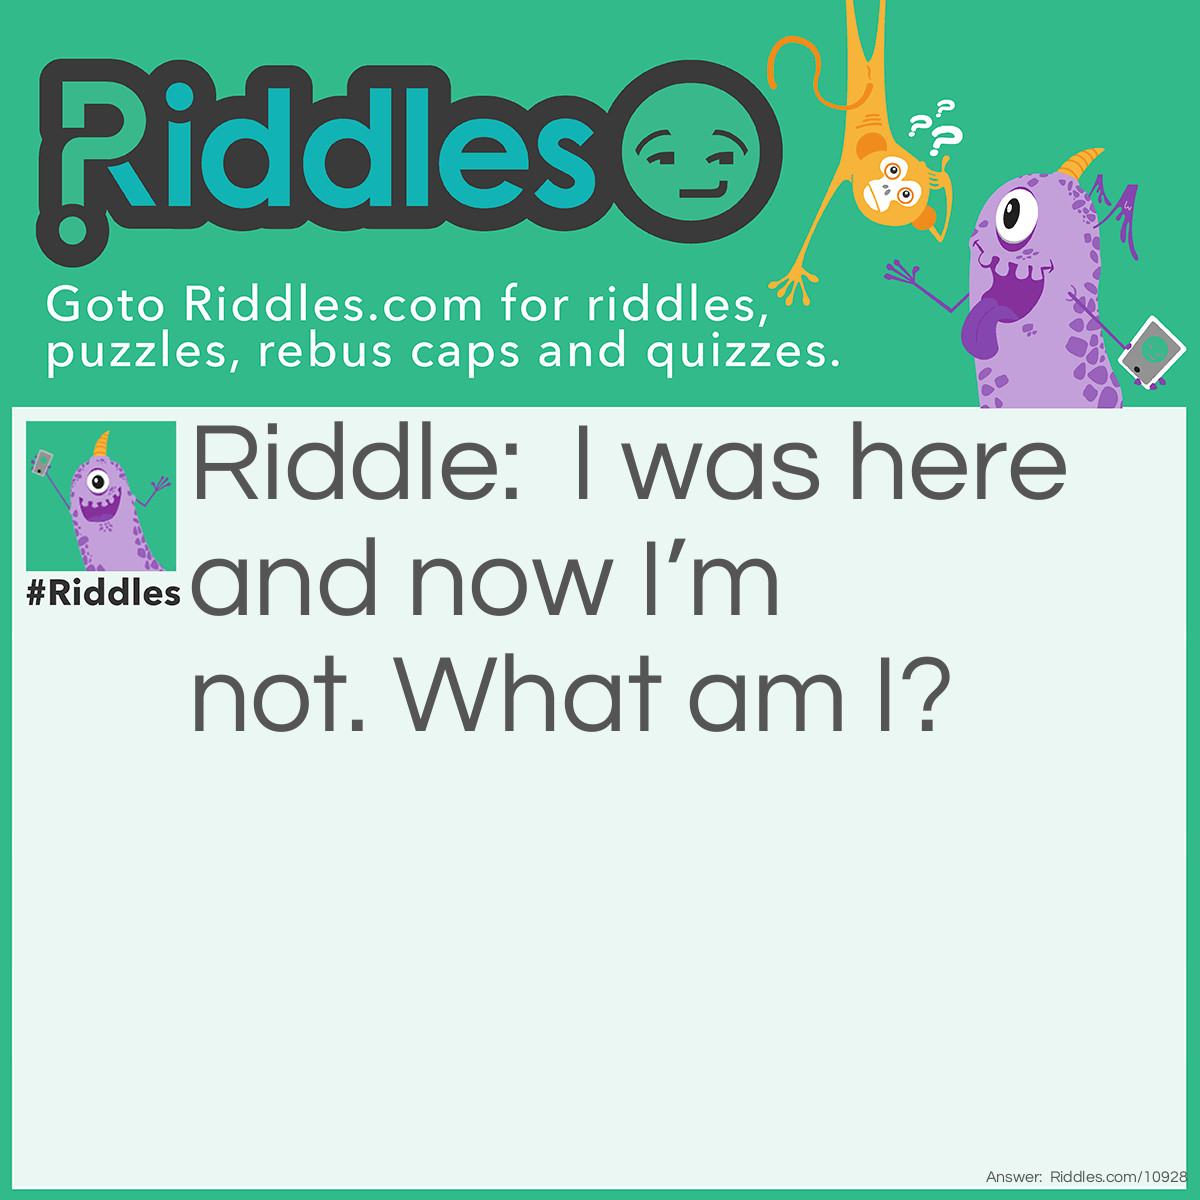 Riddle: I was here and now I’m not. What am I? Answer: Gone.